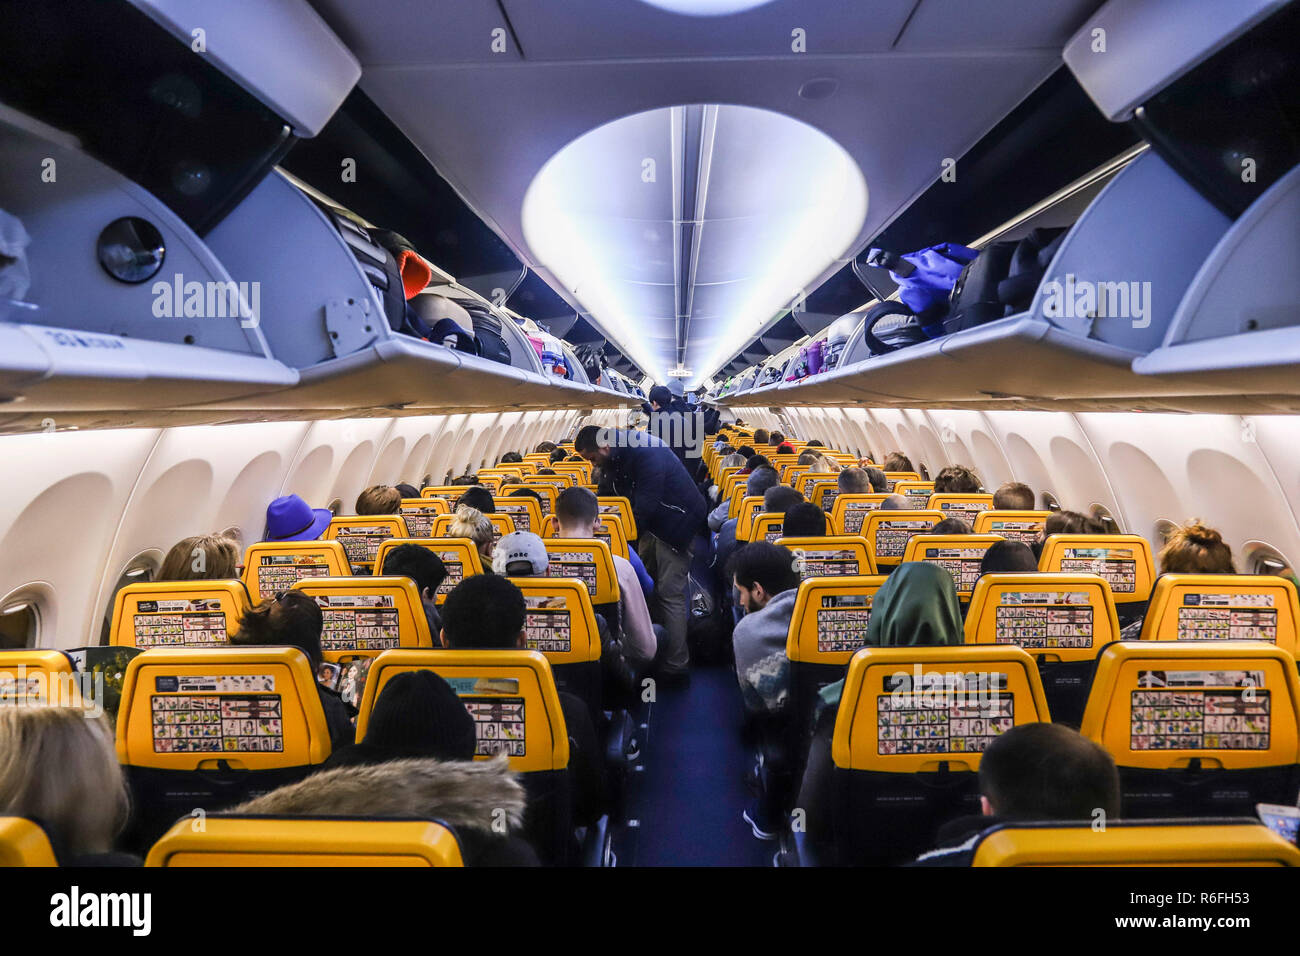 Passengers Seen In The New Boeing Sky Interior Cabin Of